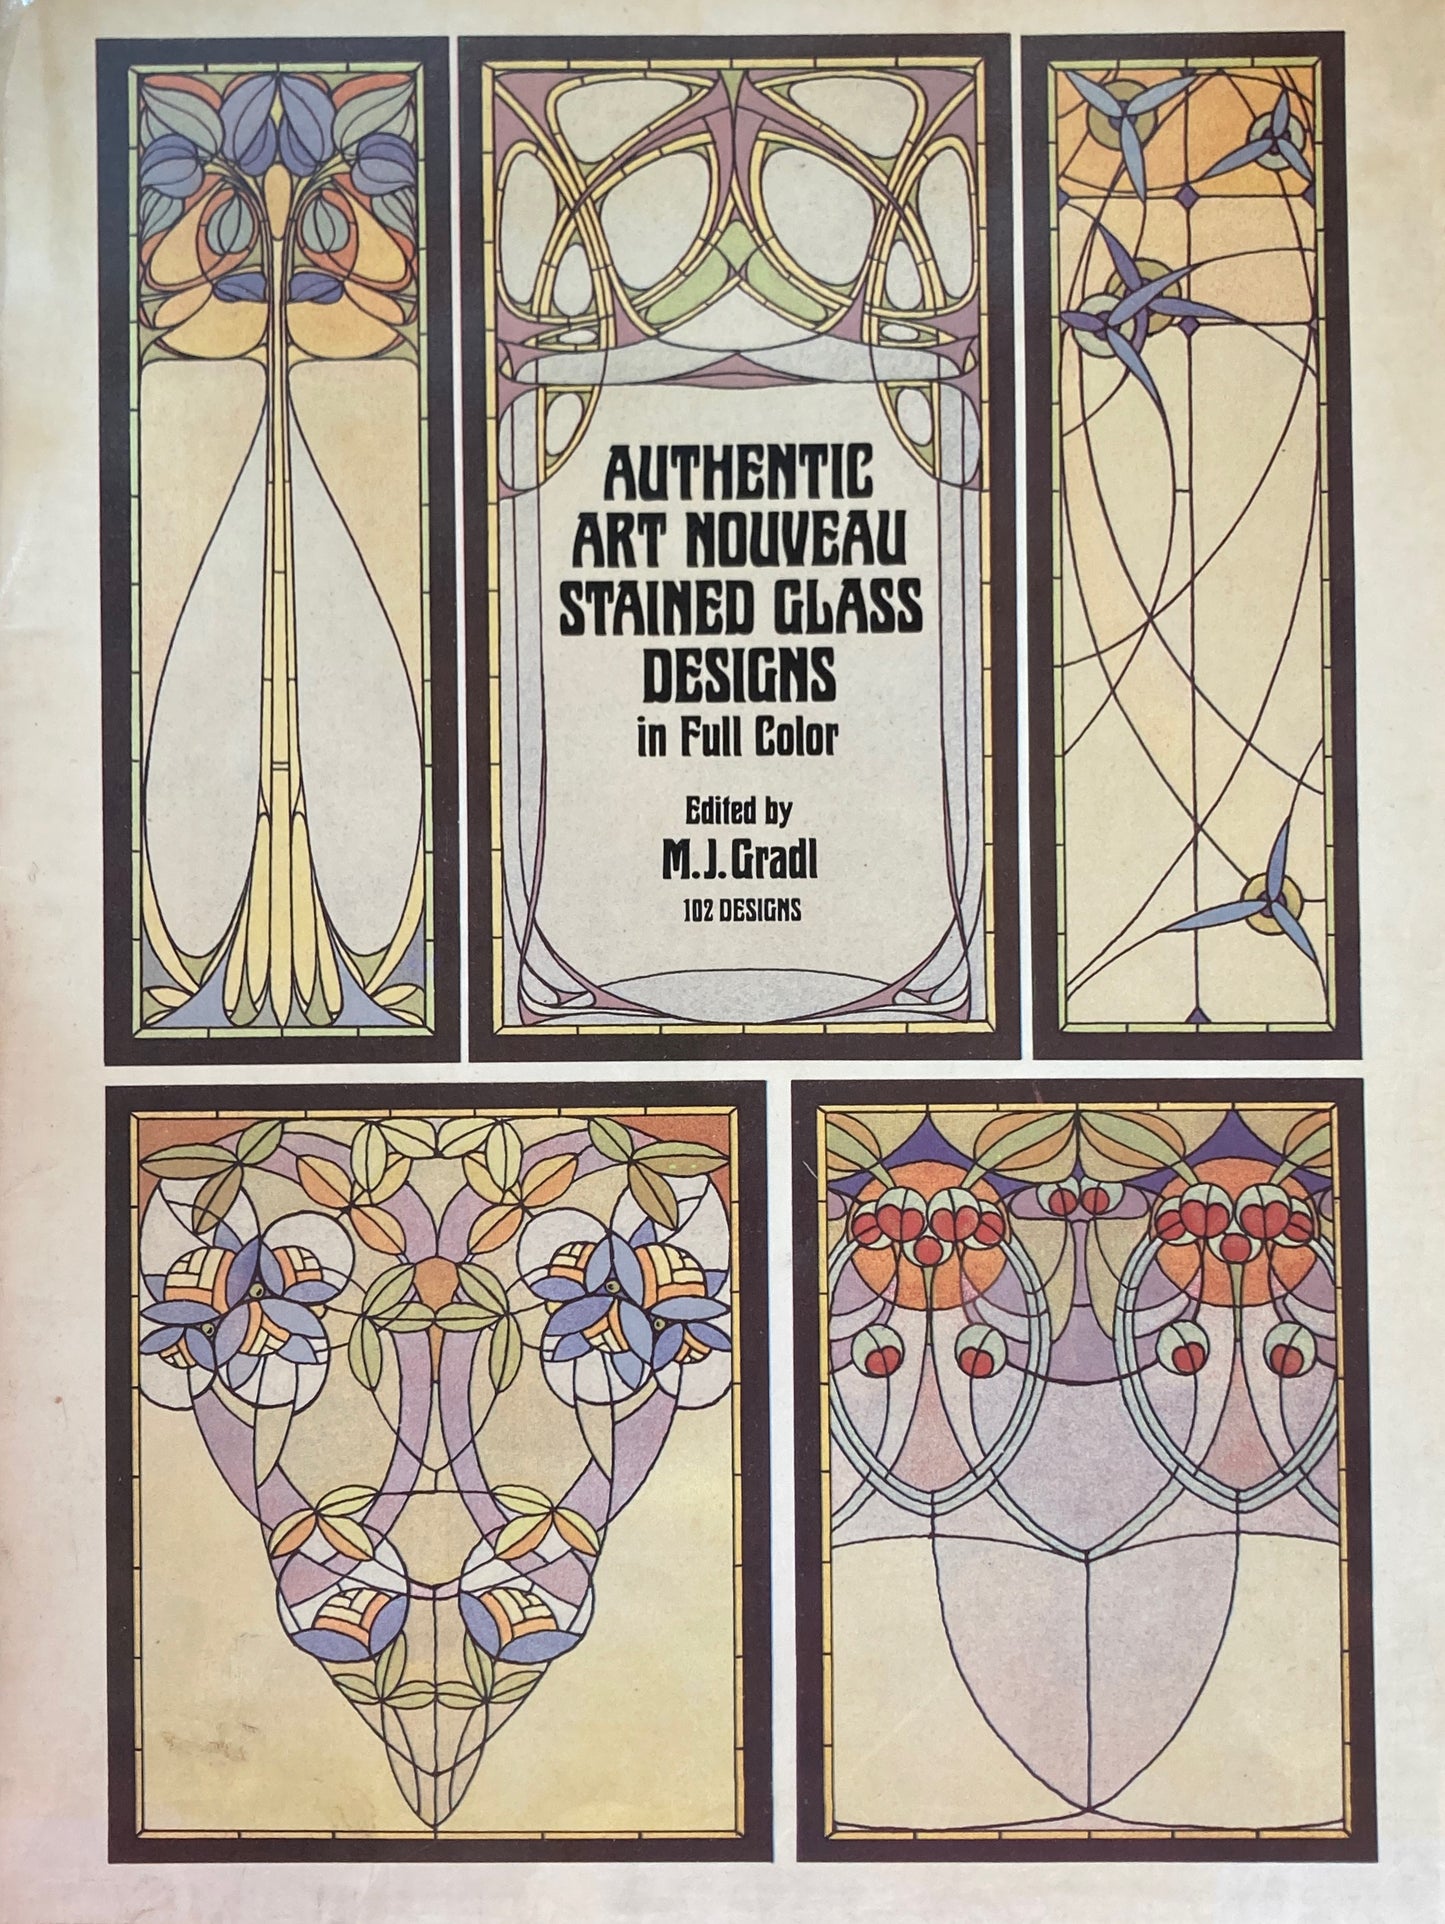 Authentic Art Nouveau Stained Glass Designs in Full Color 　Dover